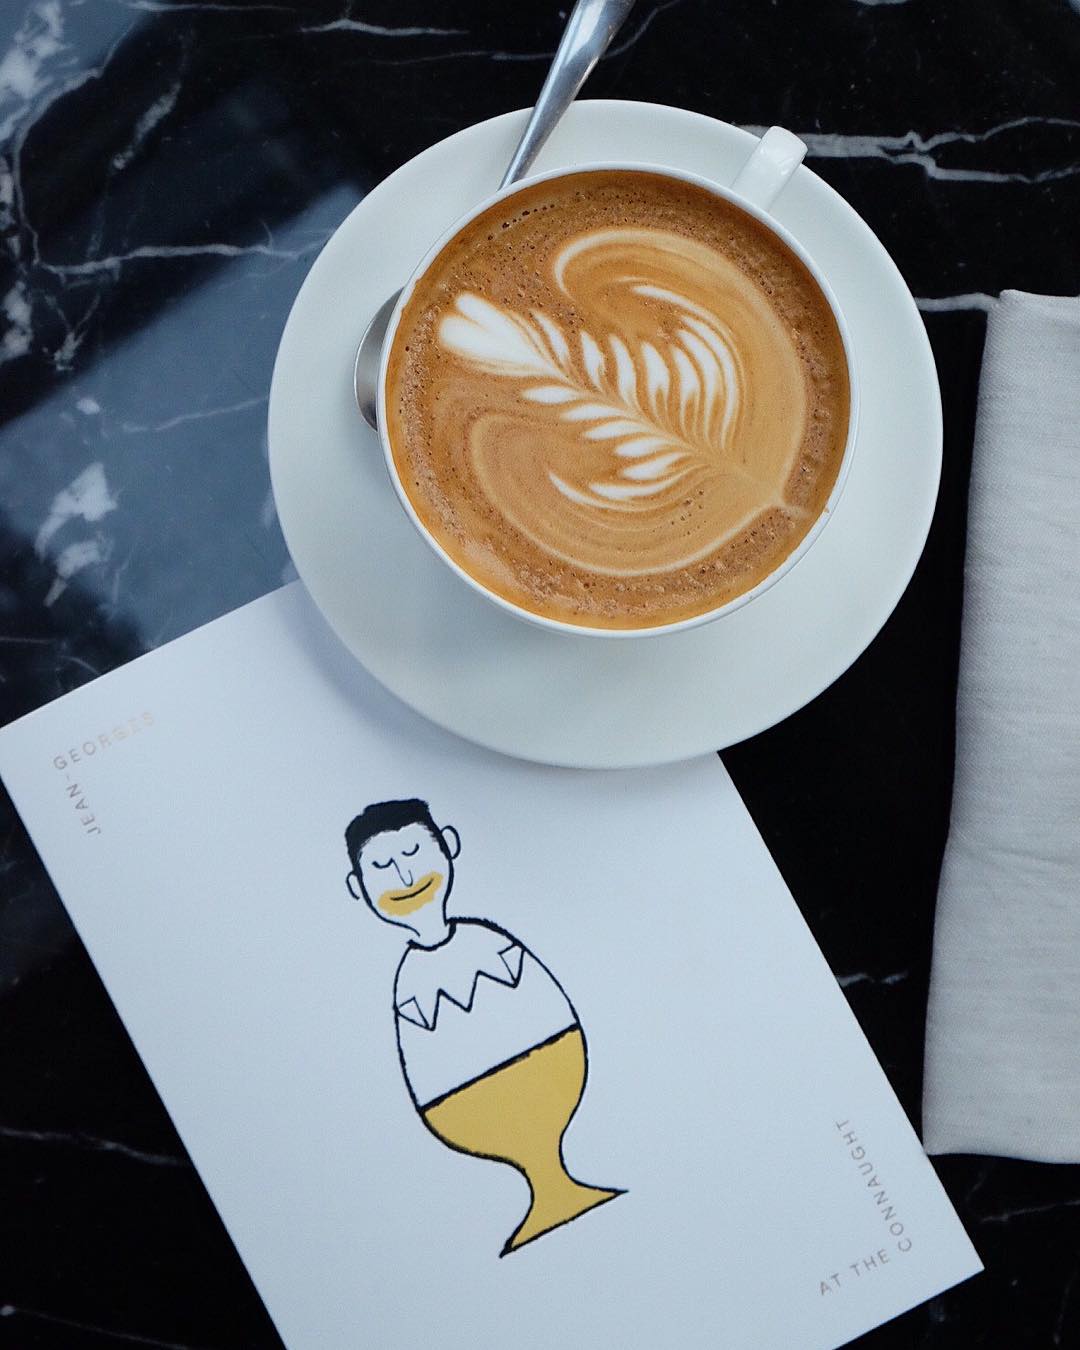 One of Jean Jullien's new illustrations for Jean-Georges at the Connaught